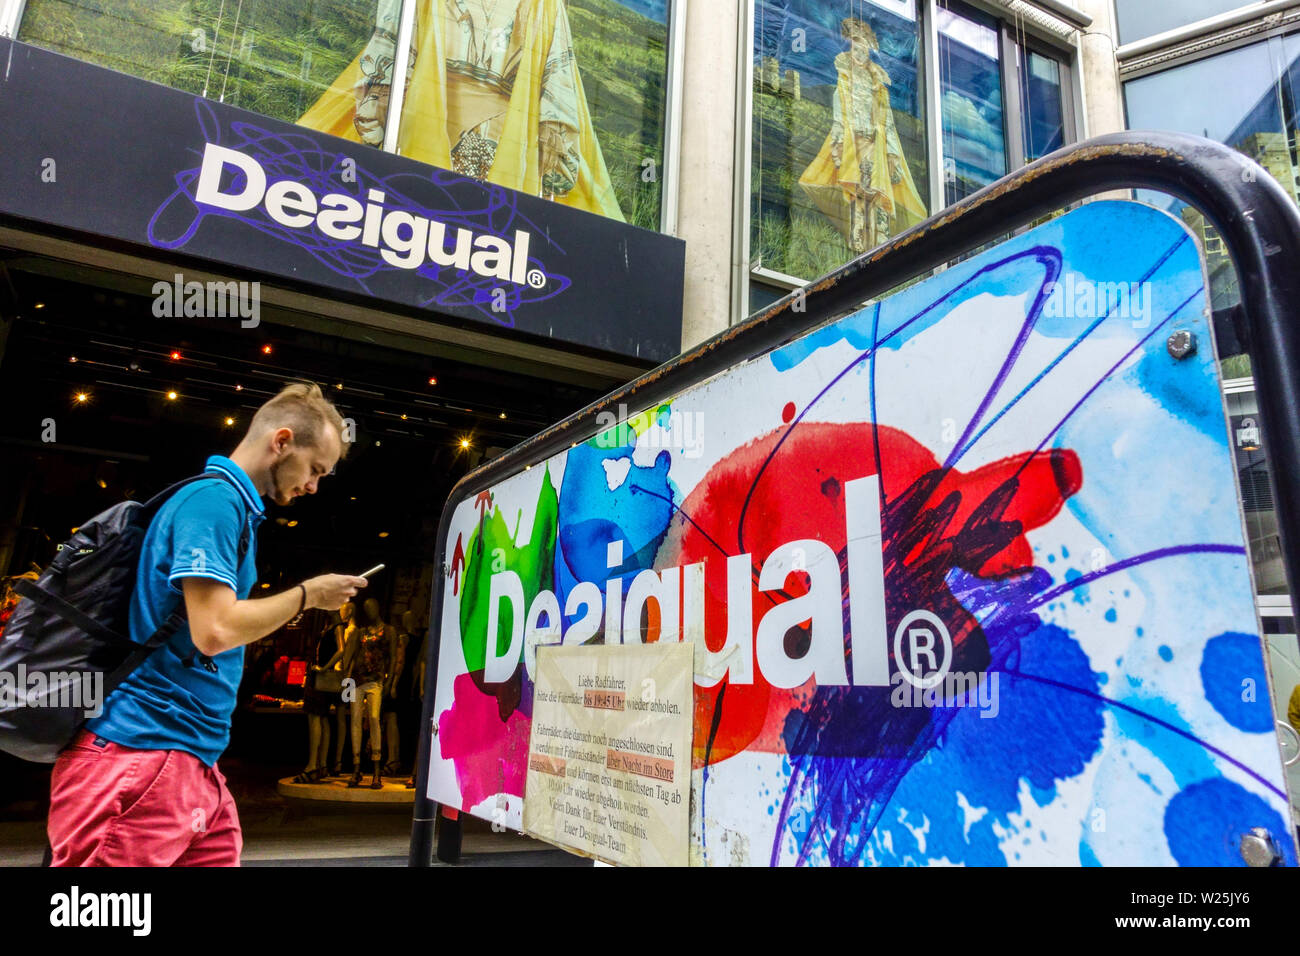 In front of the Desigual store, Dresden Germany Europe Stock Photo